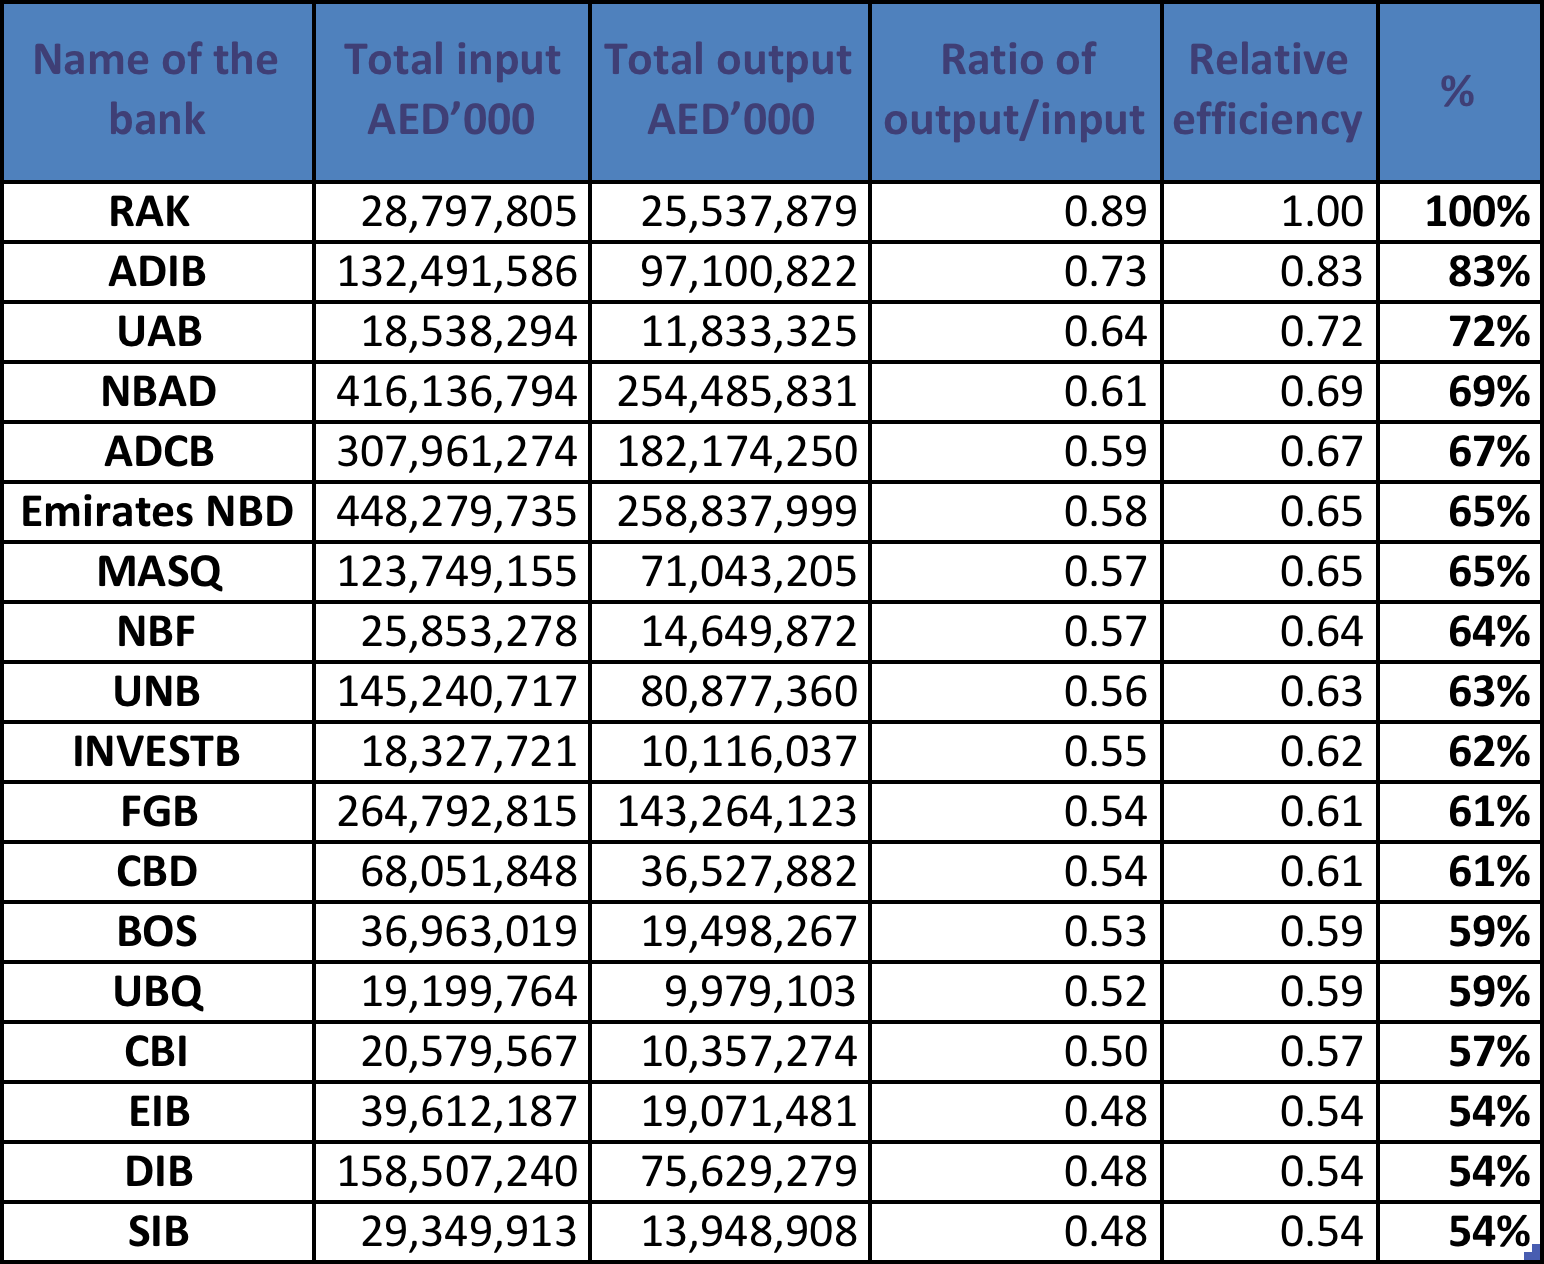 illustrating the total input, output, total output/input ratio, and efficiency of 18 financial institutions in UAE as of 31/12/2011